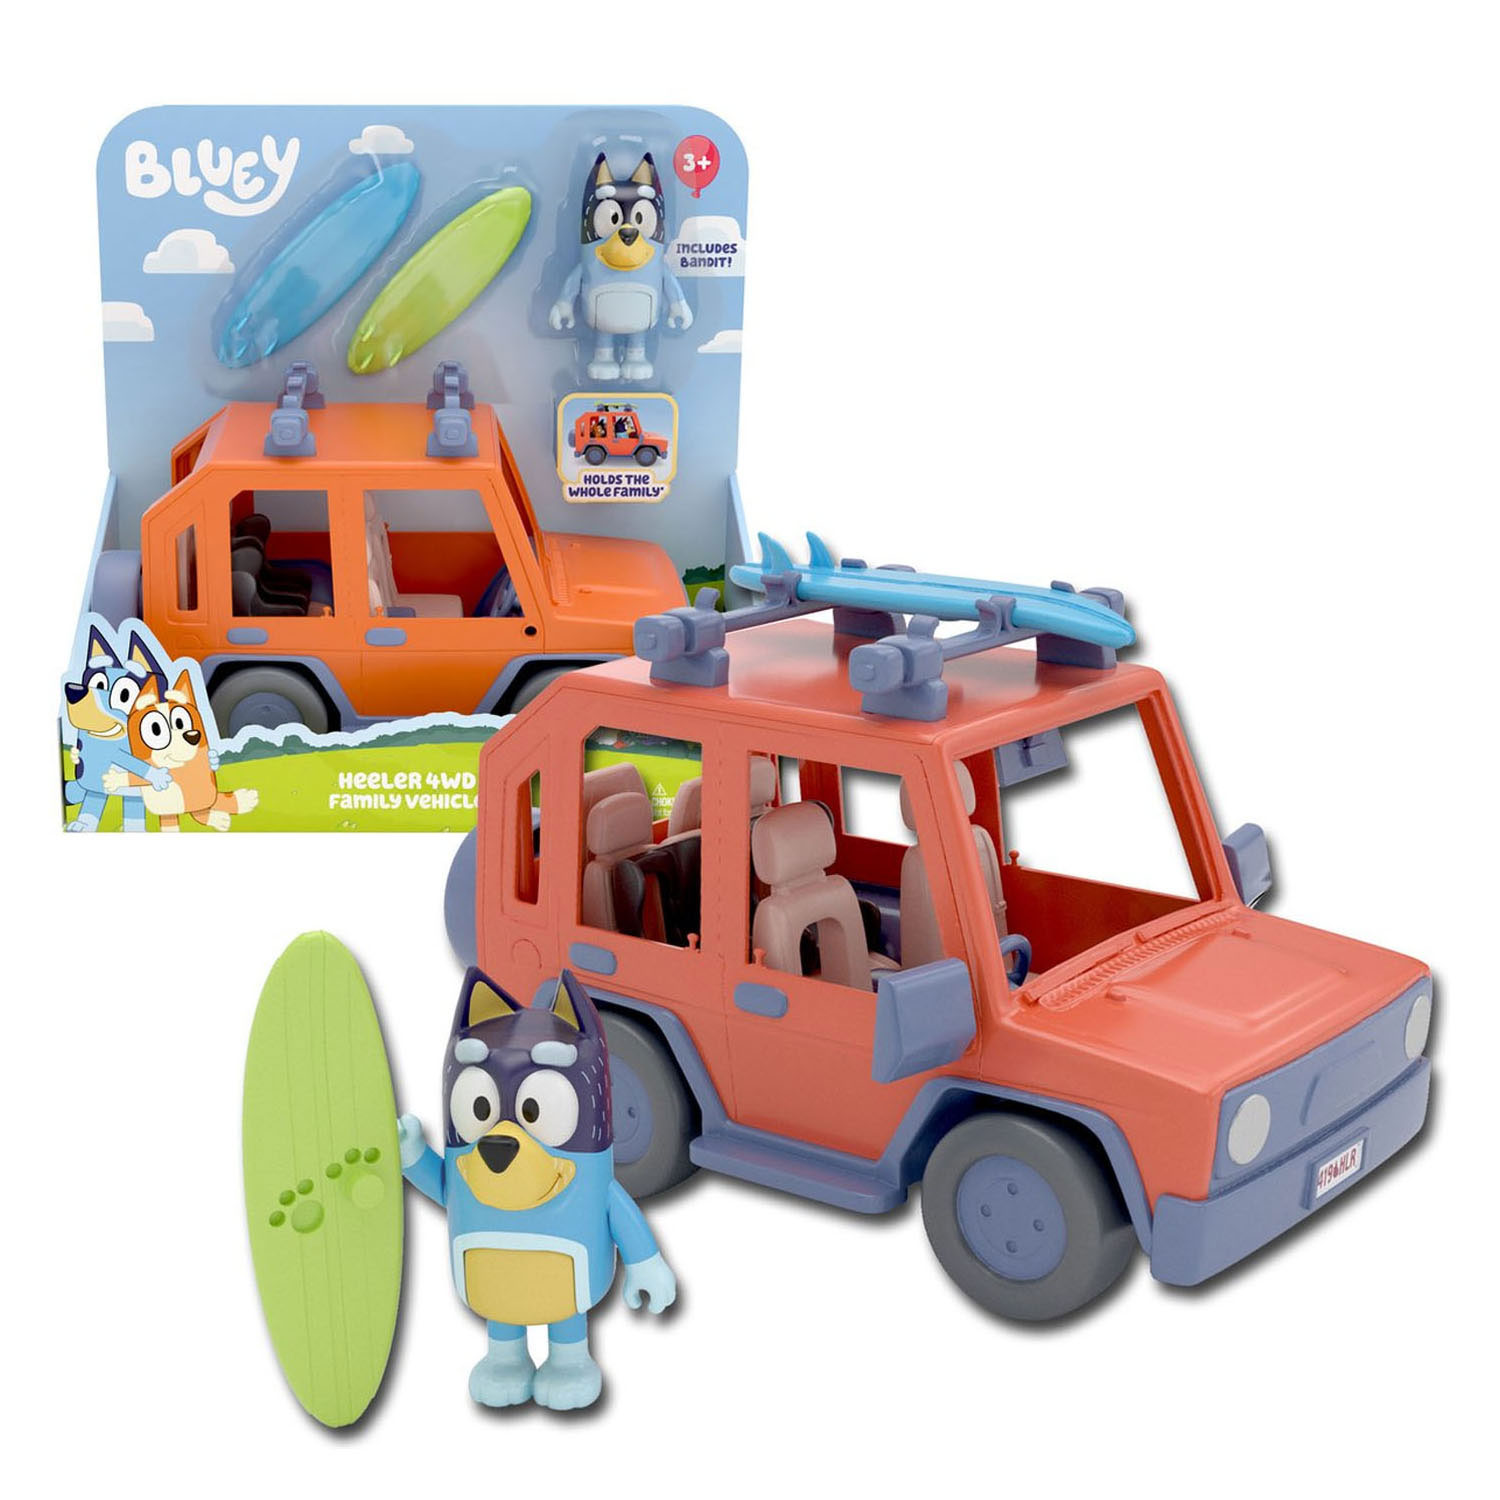 Grommen tactiek Bedankt Bluey Play Car with Accessories | Thimble Toys